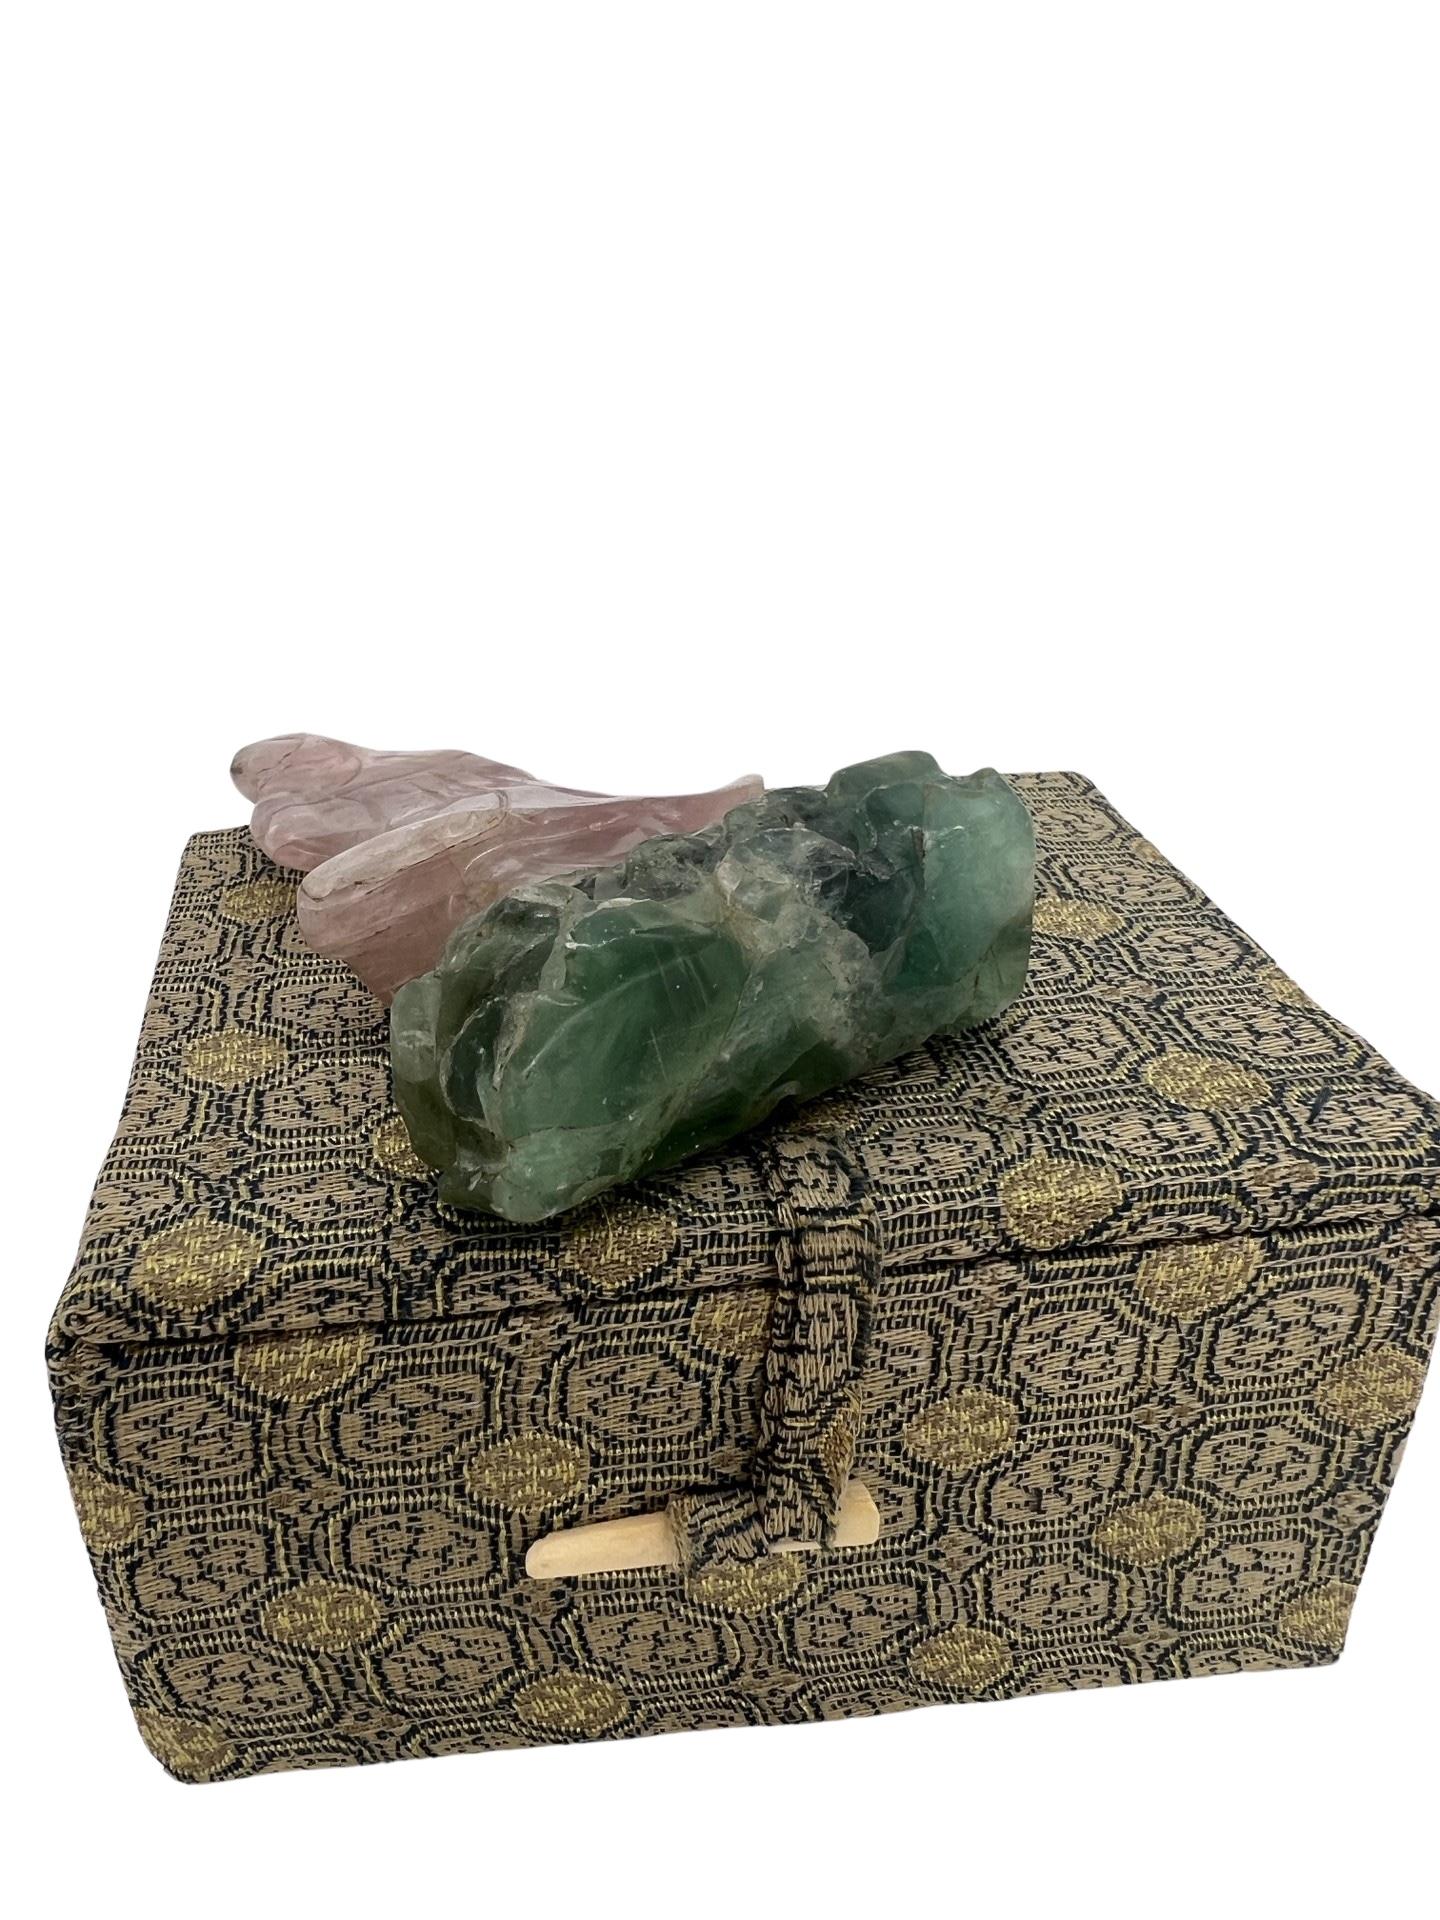 An immortal figure carved from rose quartz with a jade or nephrite base. Comes in export box. Unmarked. 
Approx: 3.375